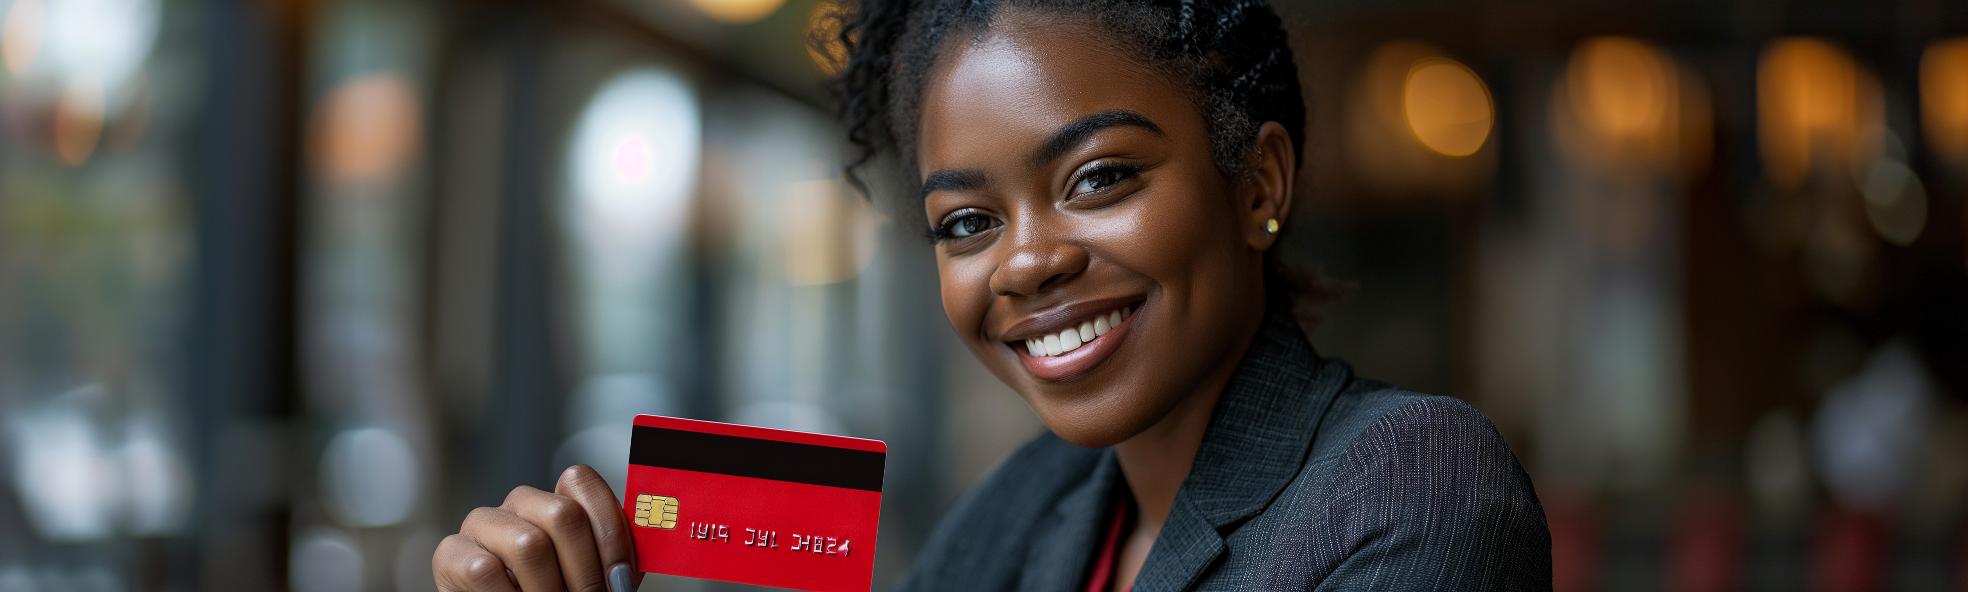 Black woman holding a red Payment card